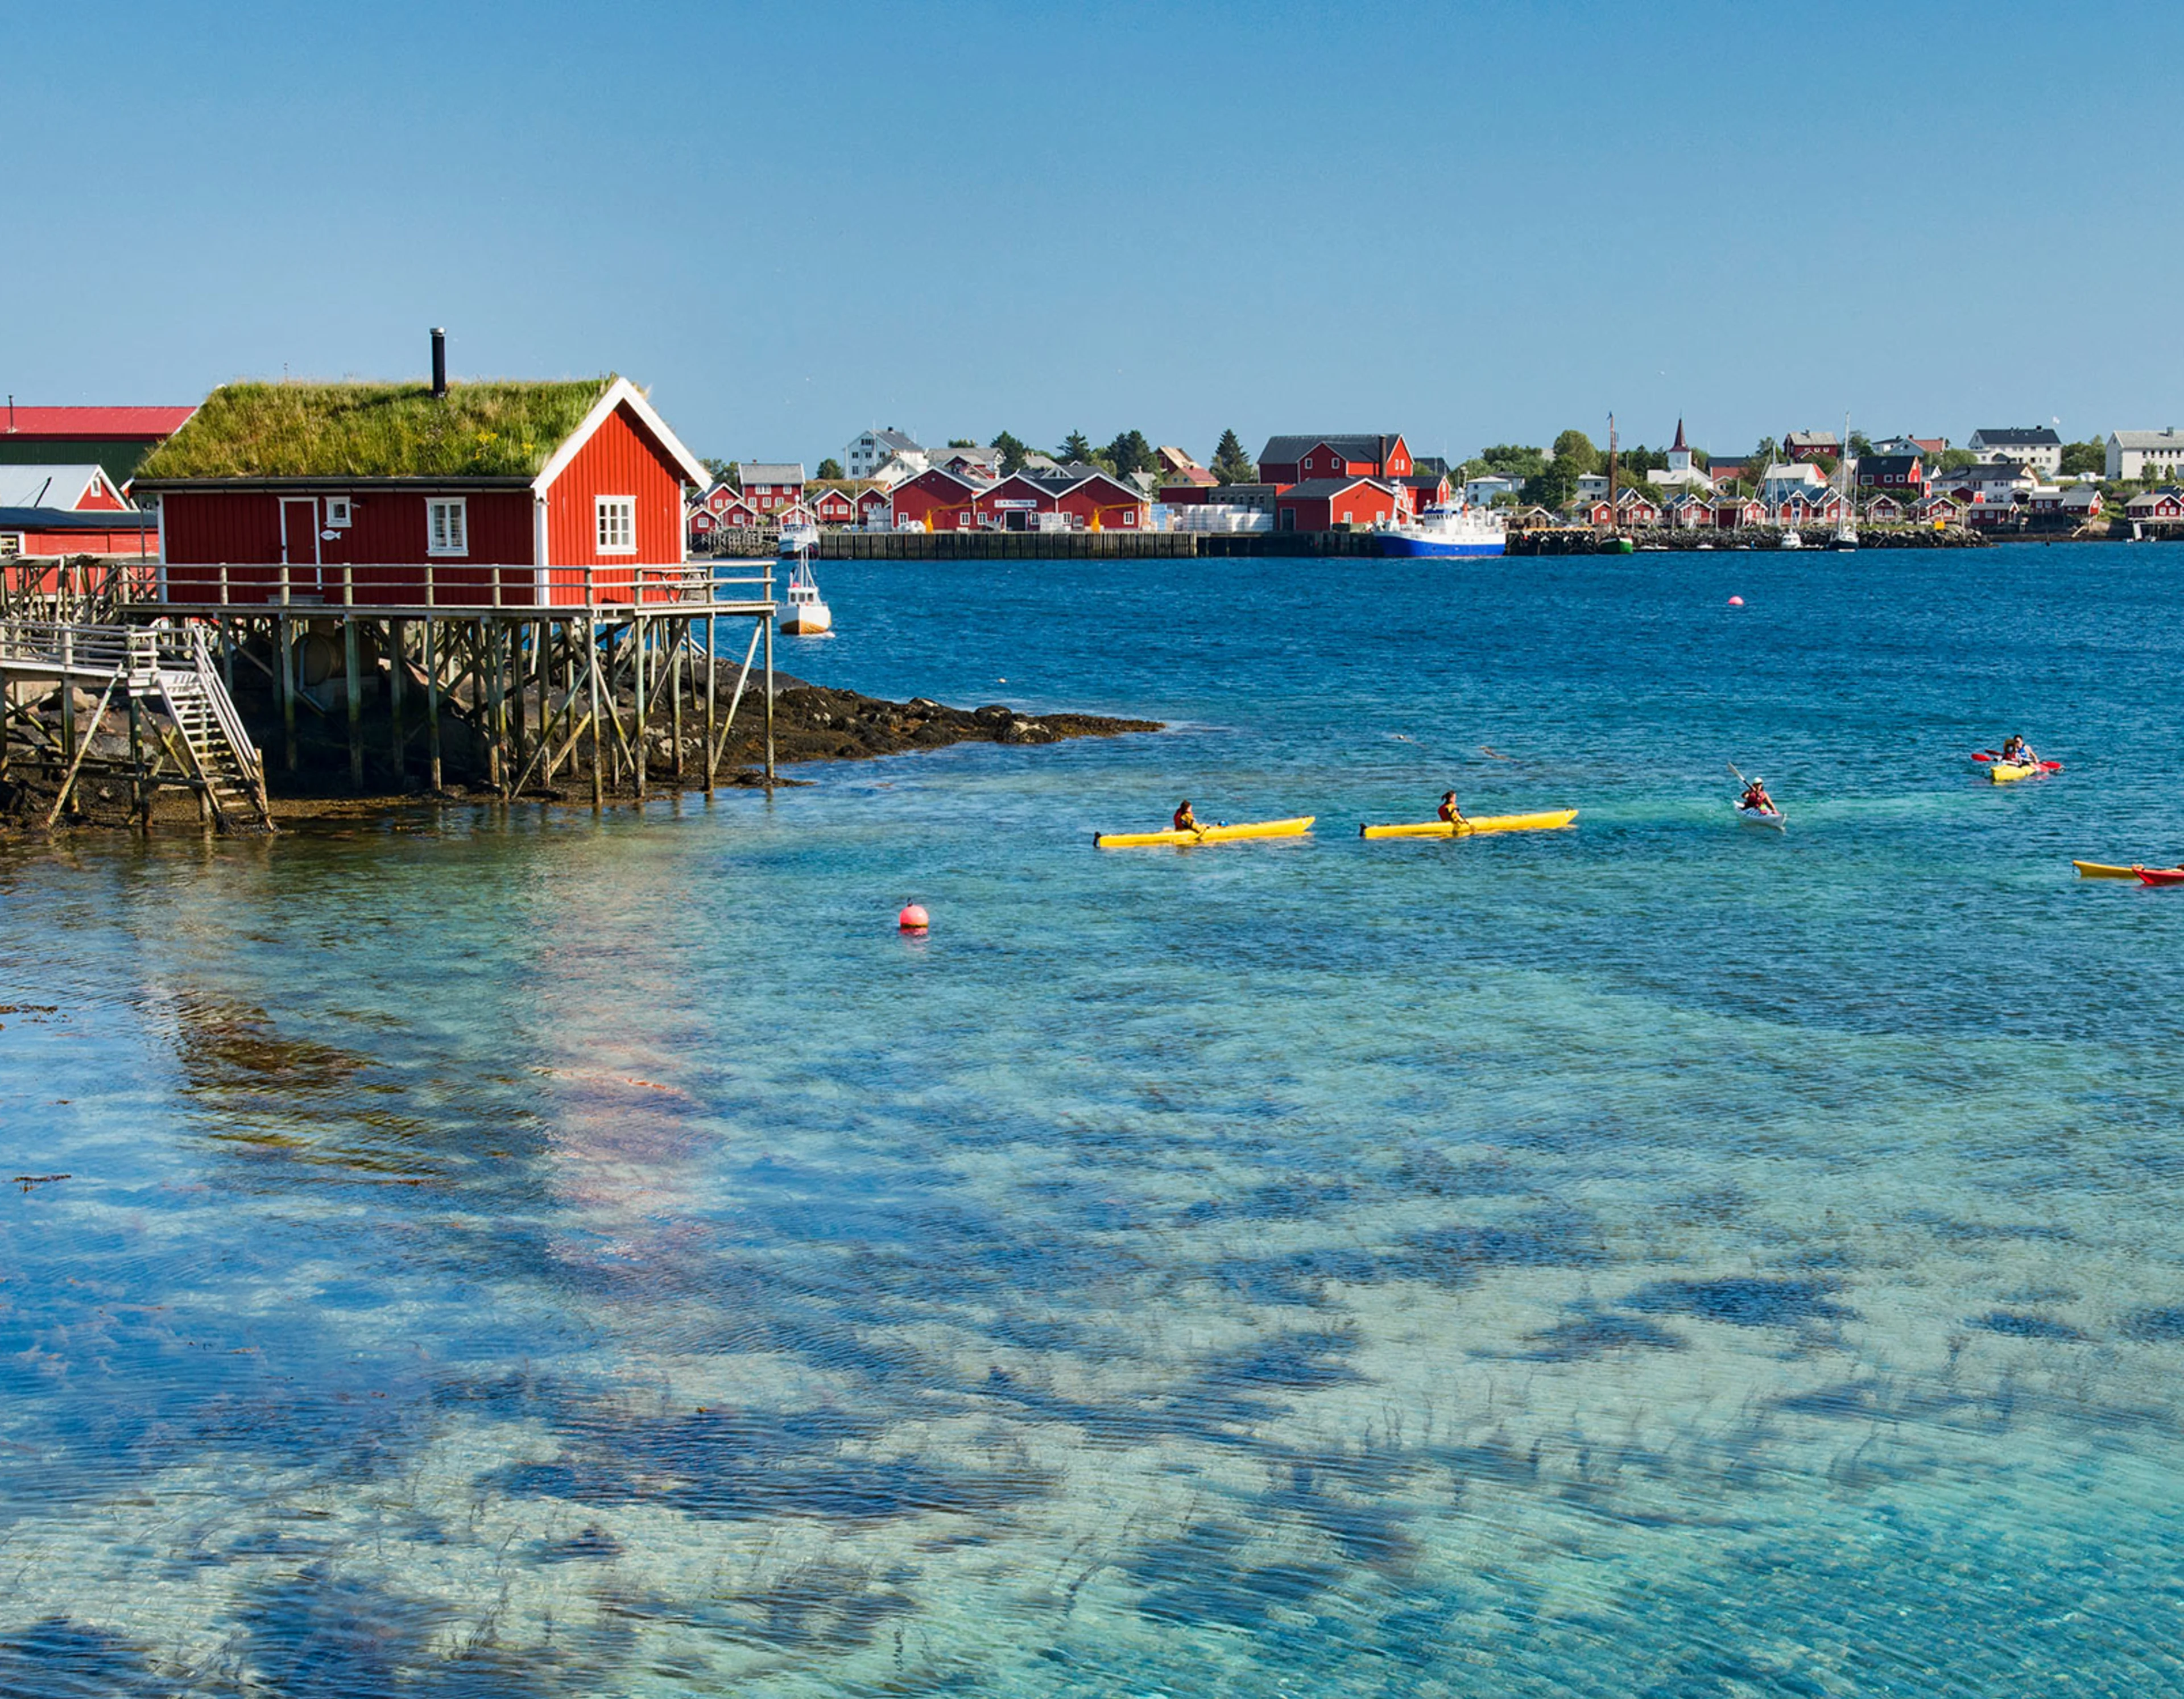 Kayaking excursion in clear turquoise waters close to red fishing huts in Reine, Lofoten